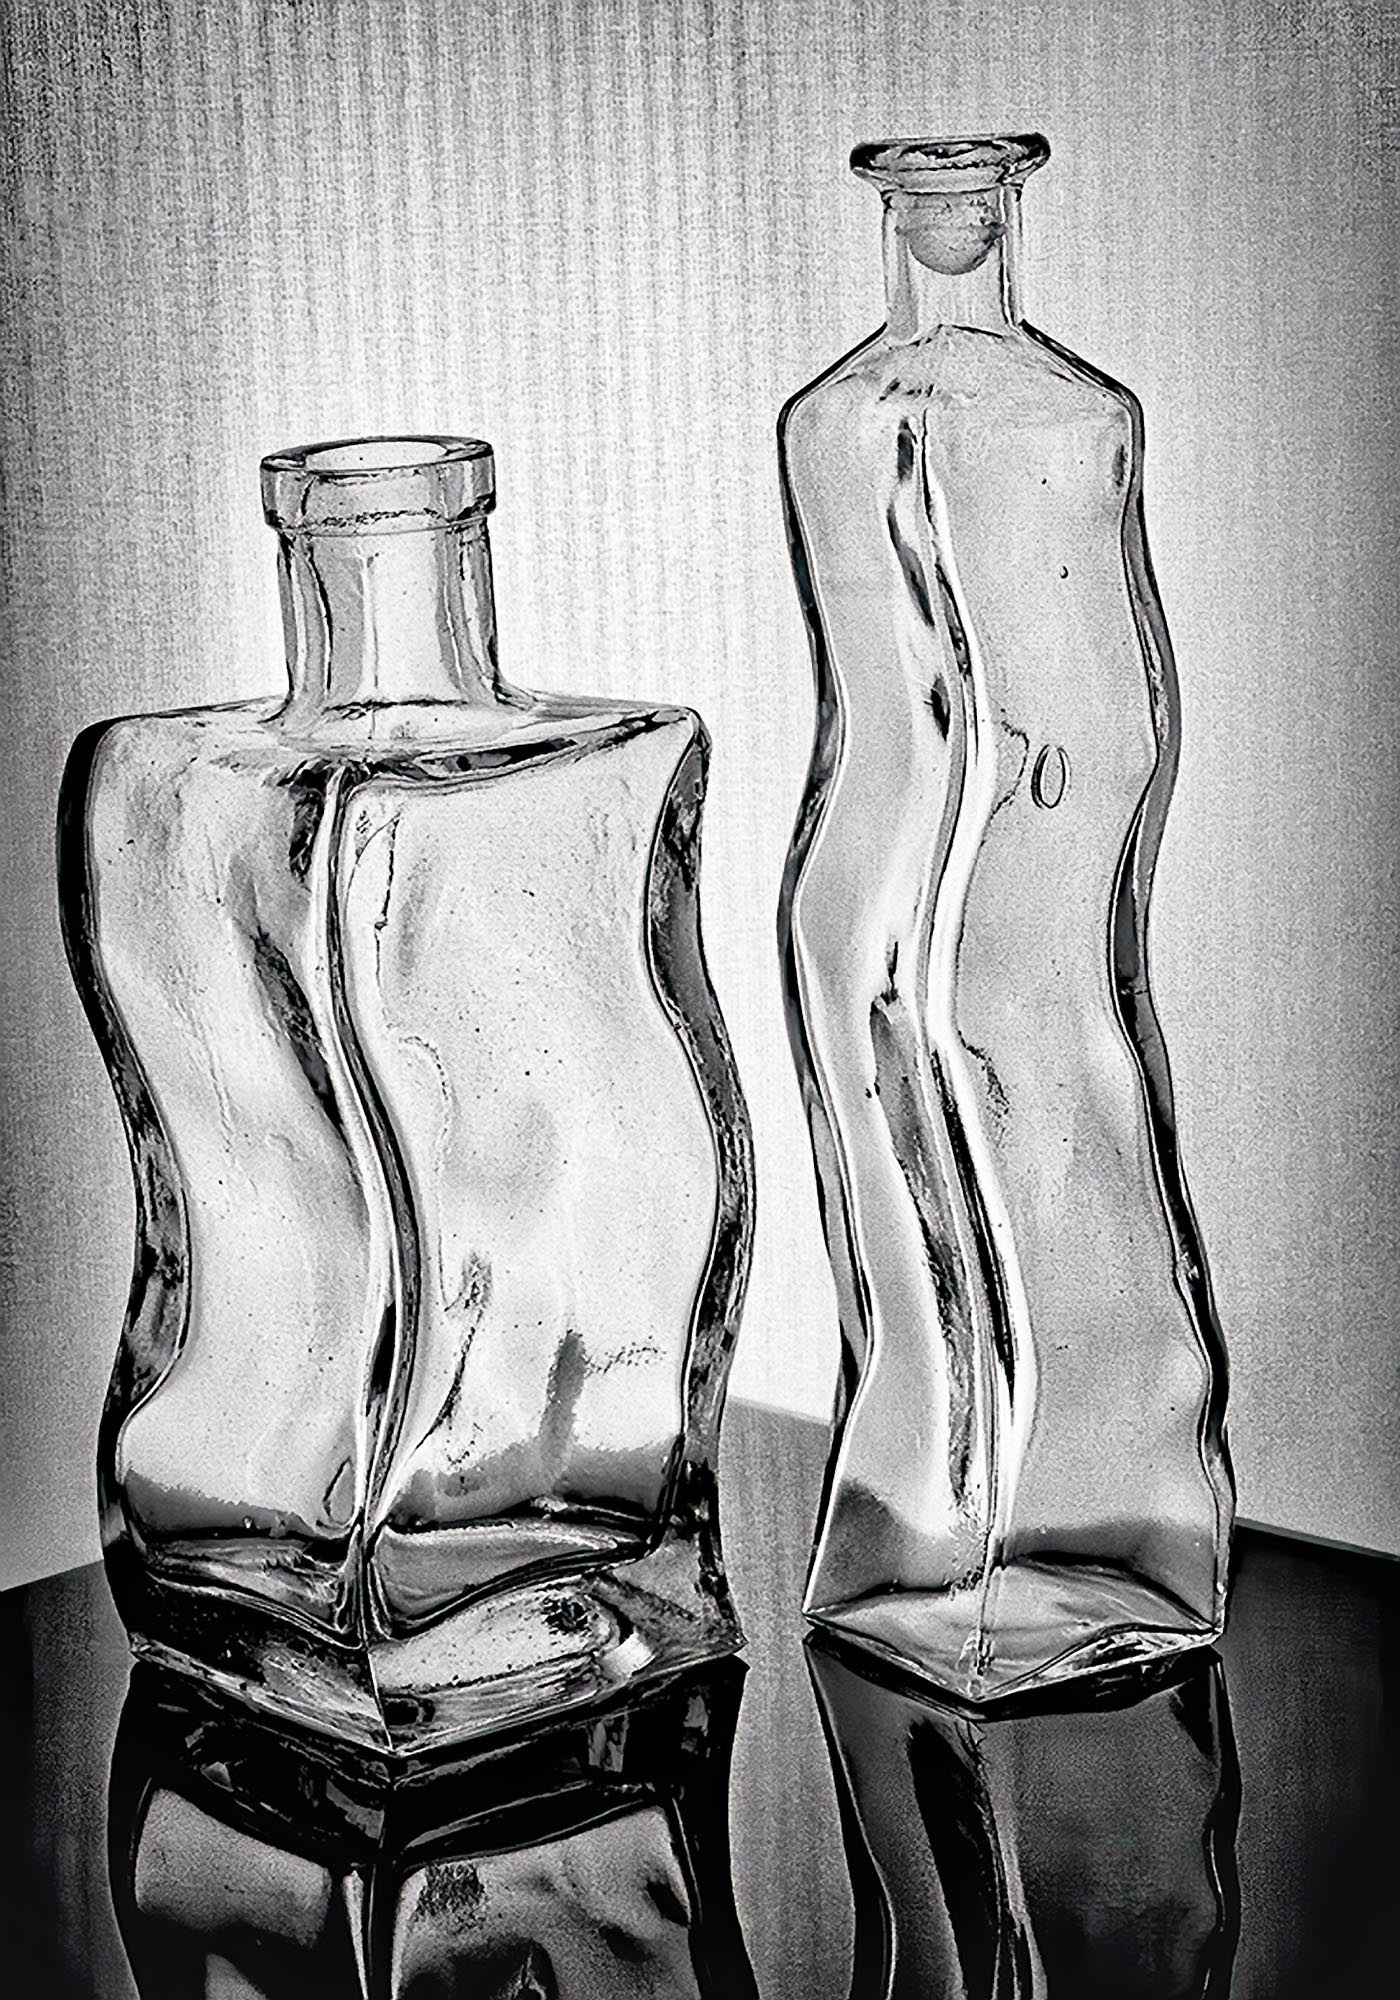 Two vases in black and white